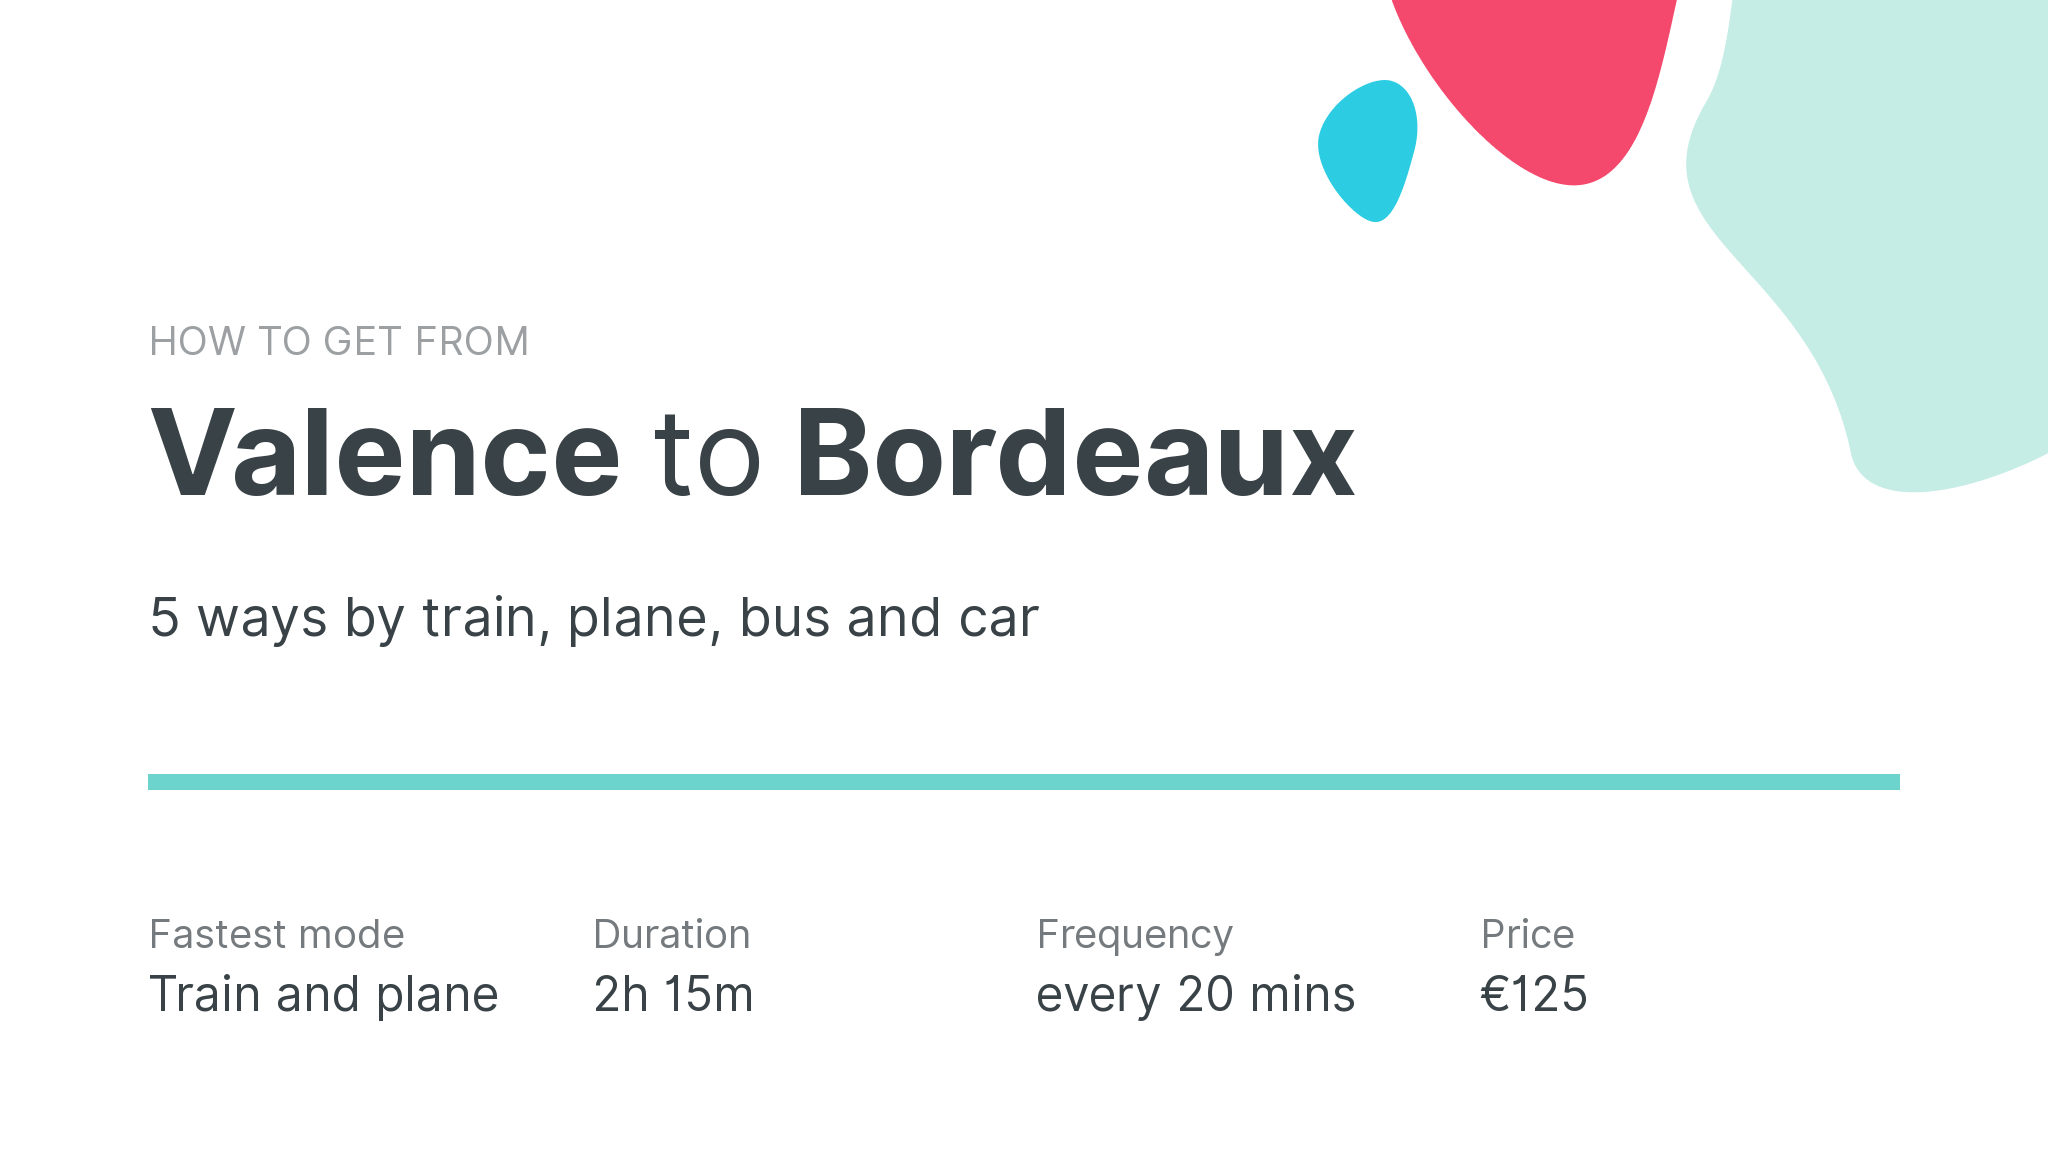 How do I get from Valence to Bordeaux